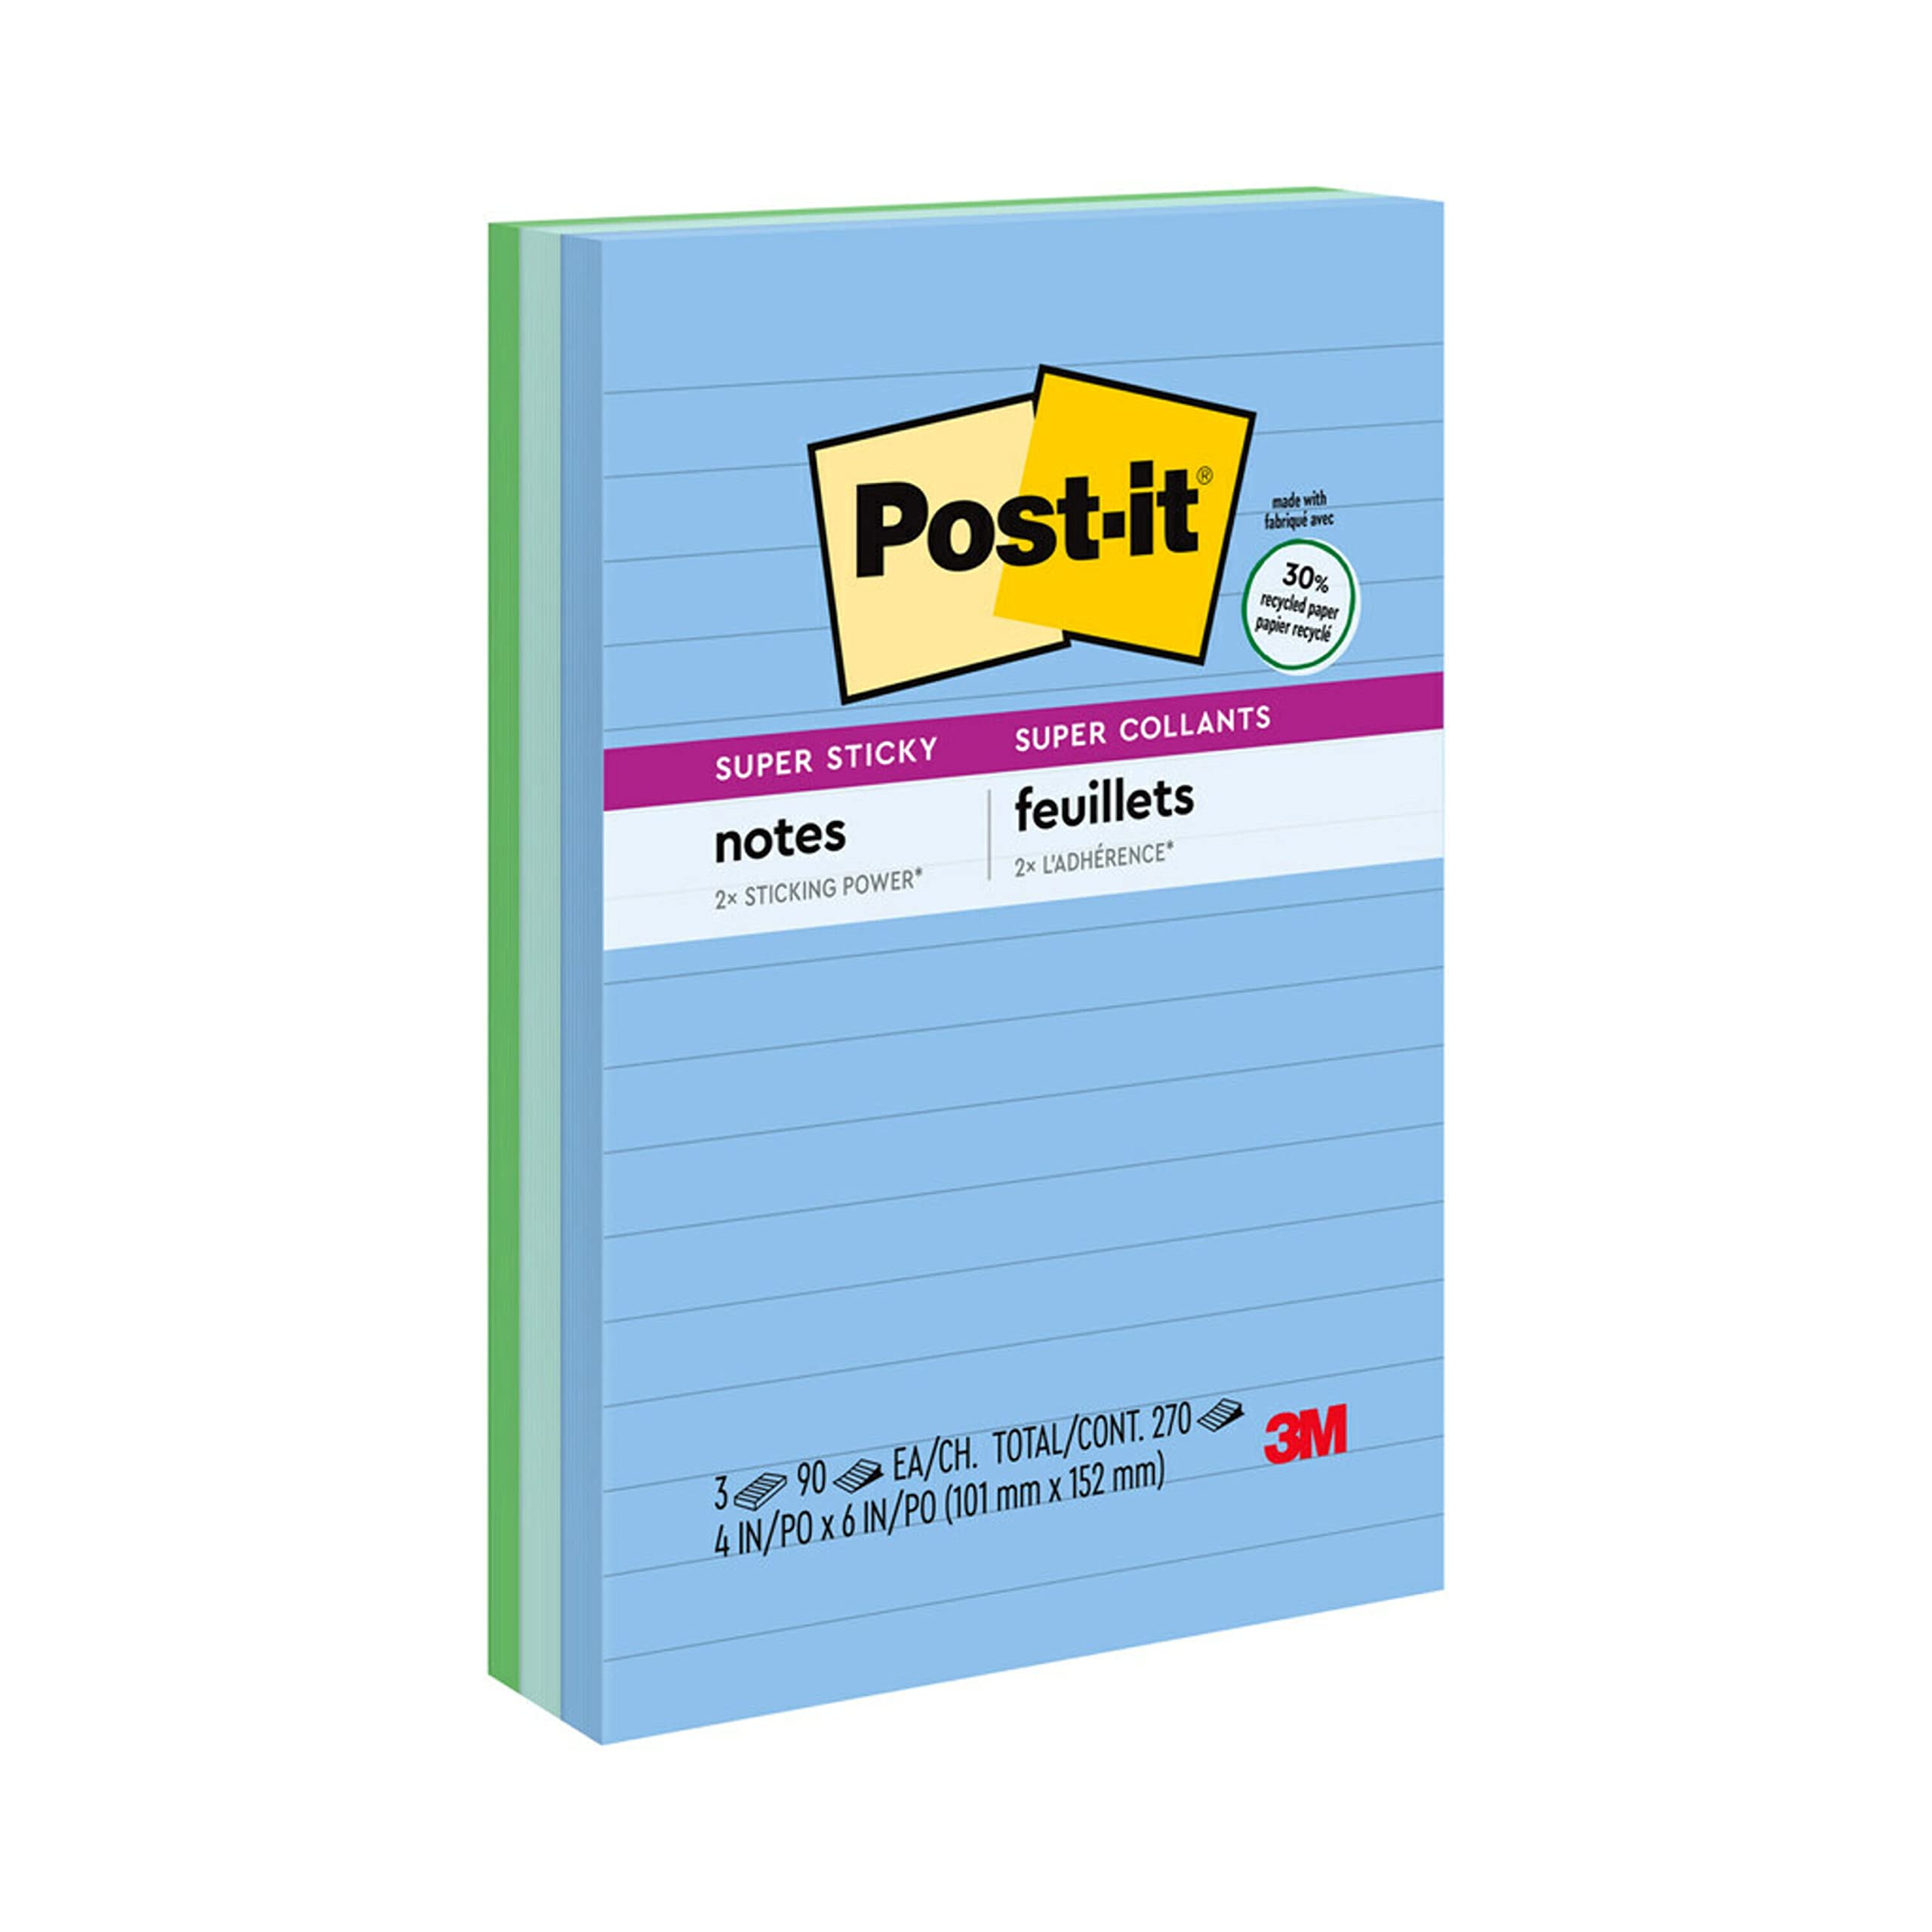 Book Cover Post-it Super Sticky Recycled Notes, 4x6 in, 3 Pads, 2x the Sticking Power, Poptimistic, Bright Colors, 30% Recycled Paper (660-3SST)